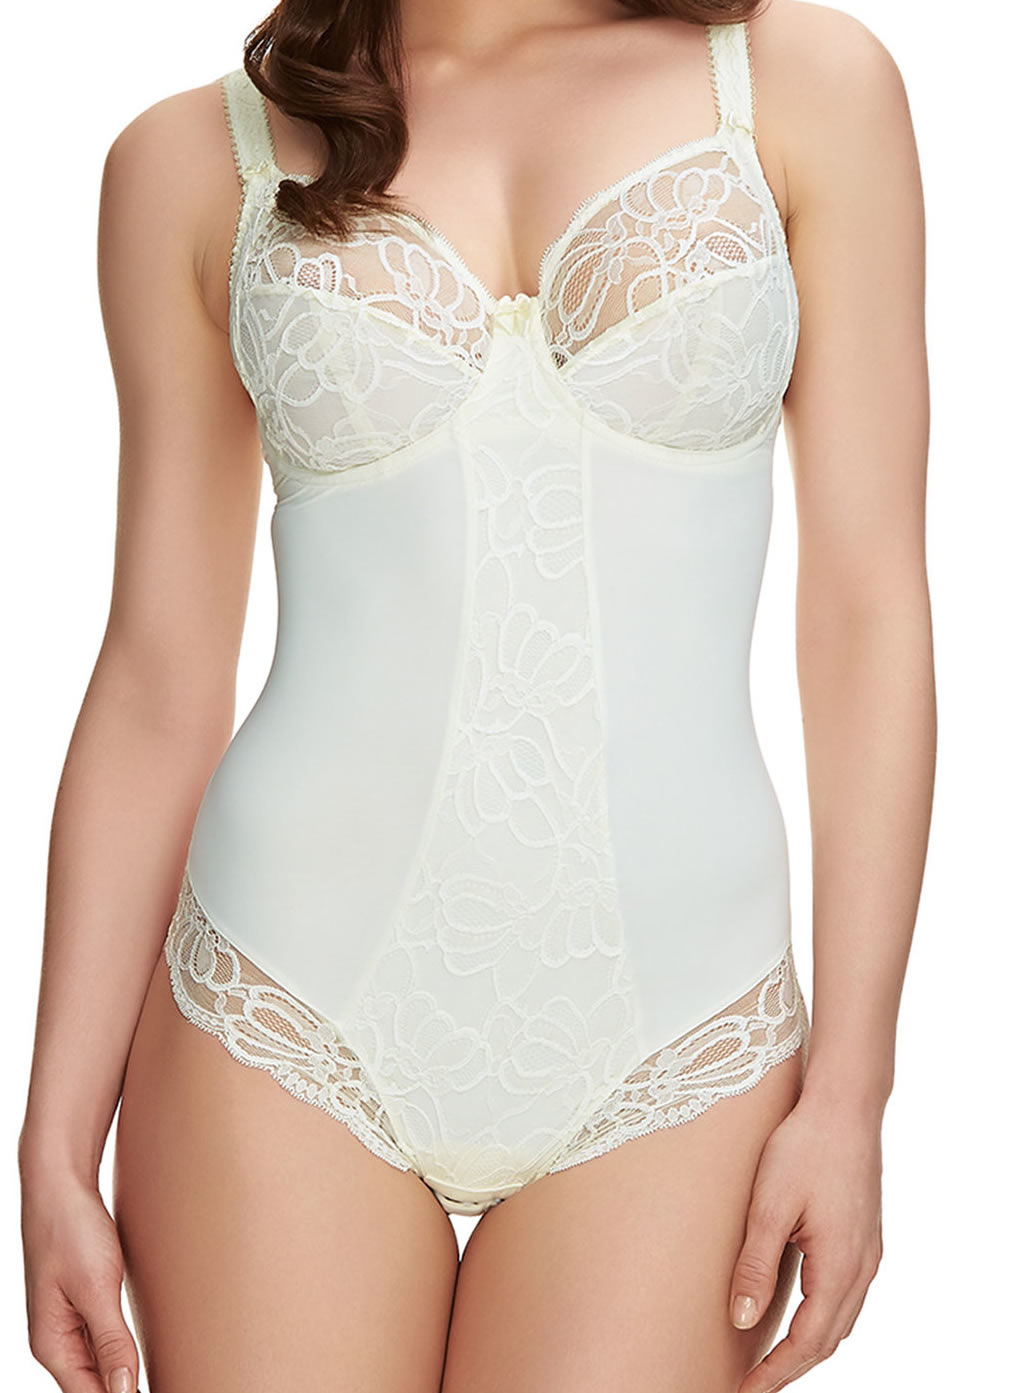 Fantasie-Jacqueline Underwired Side Support Lace Body Ivory